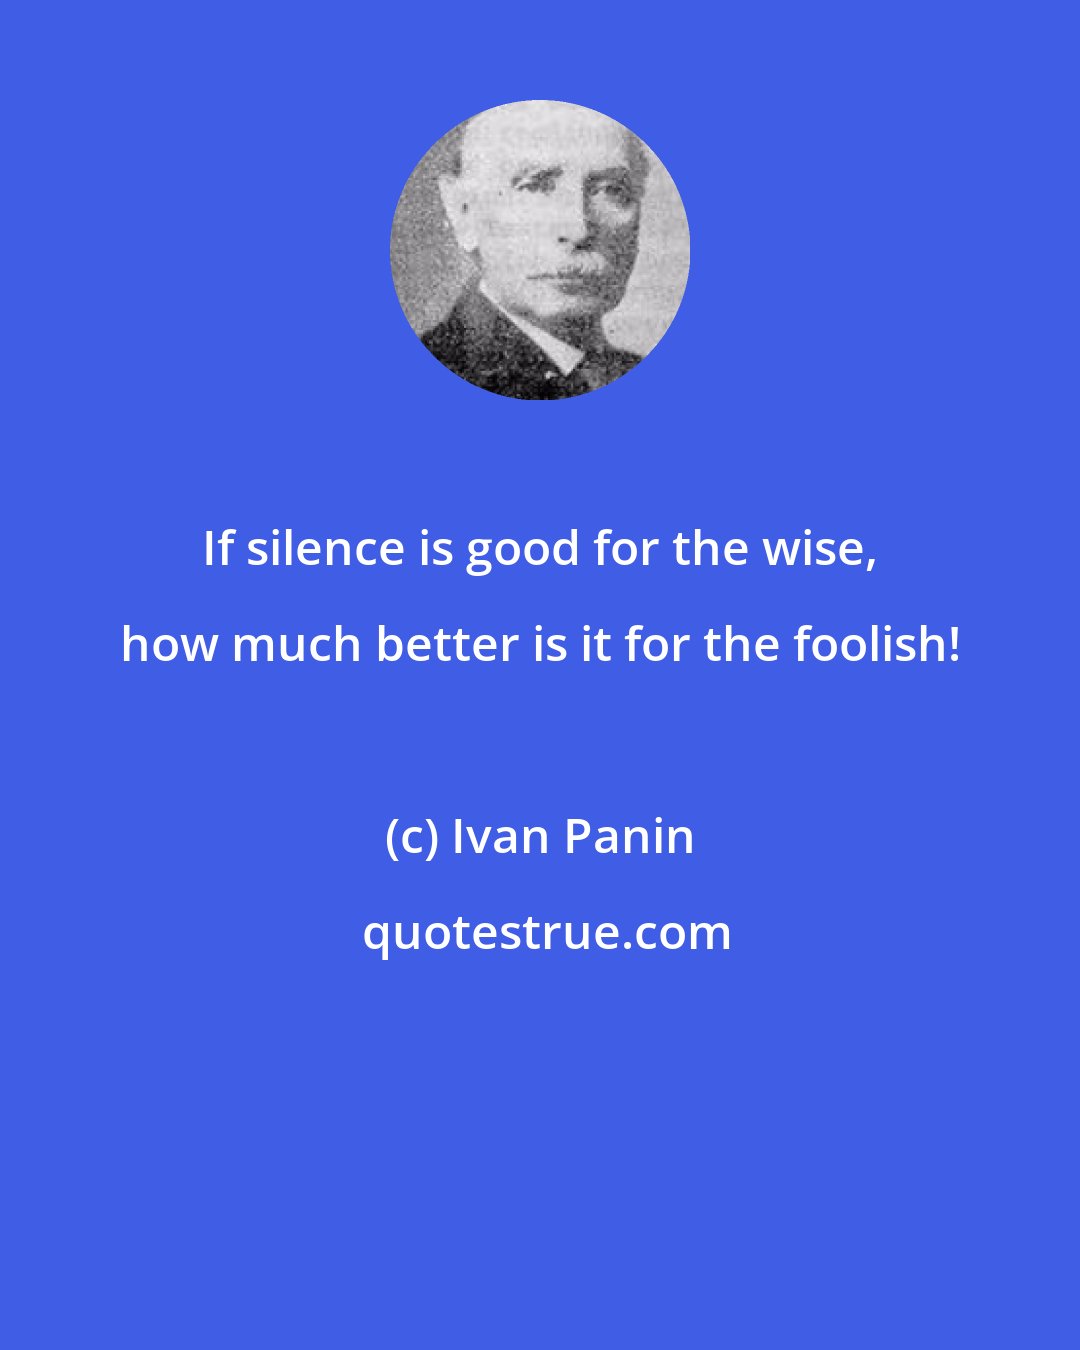 Ivan Panin: If silence is good for the wise, how much better is it for the foolish!